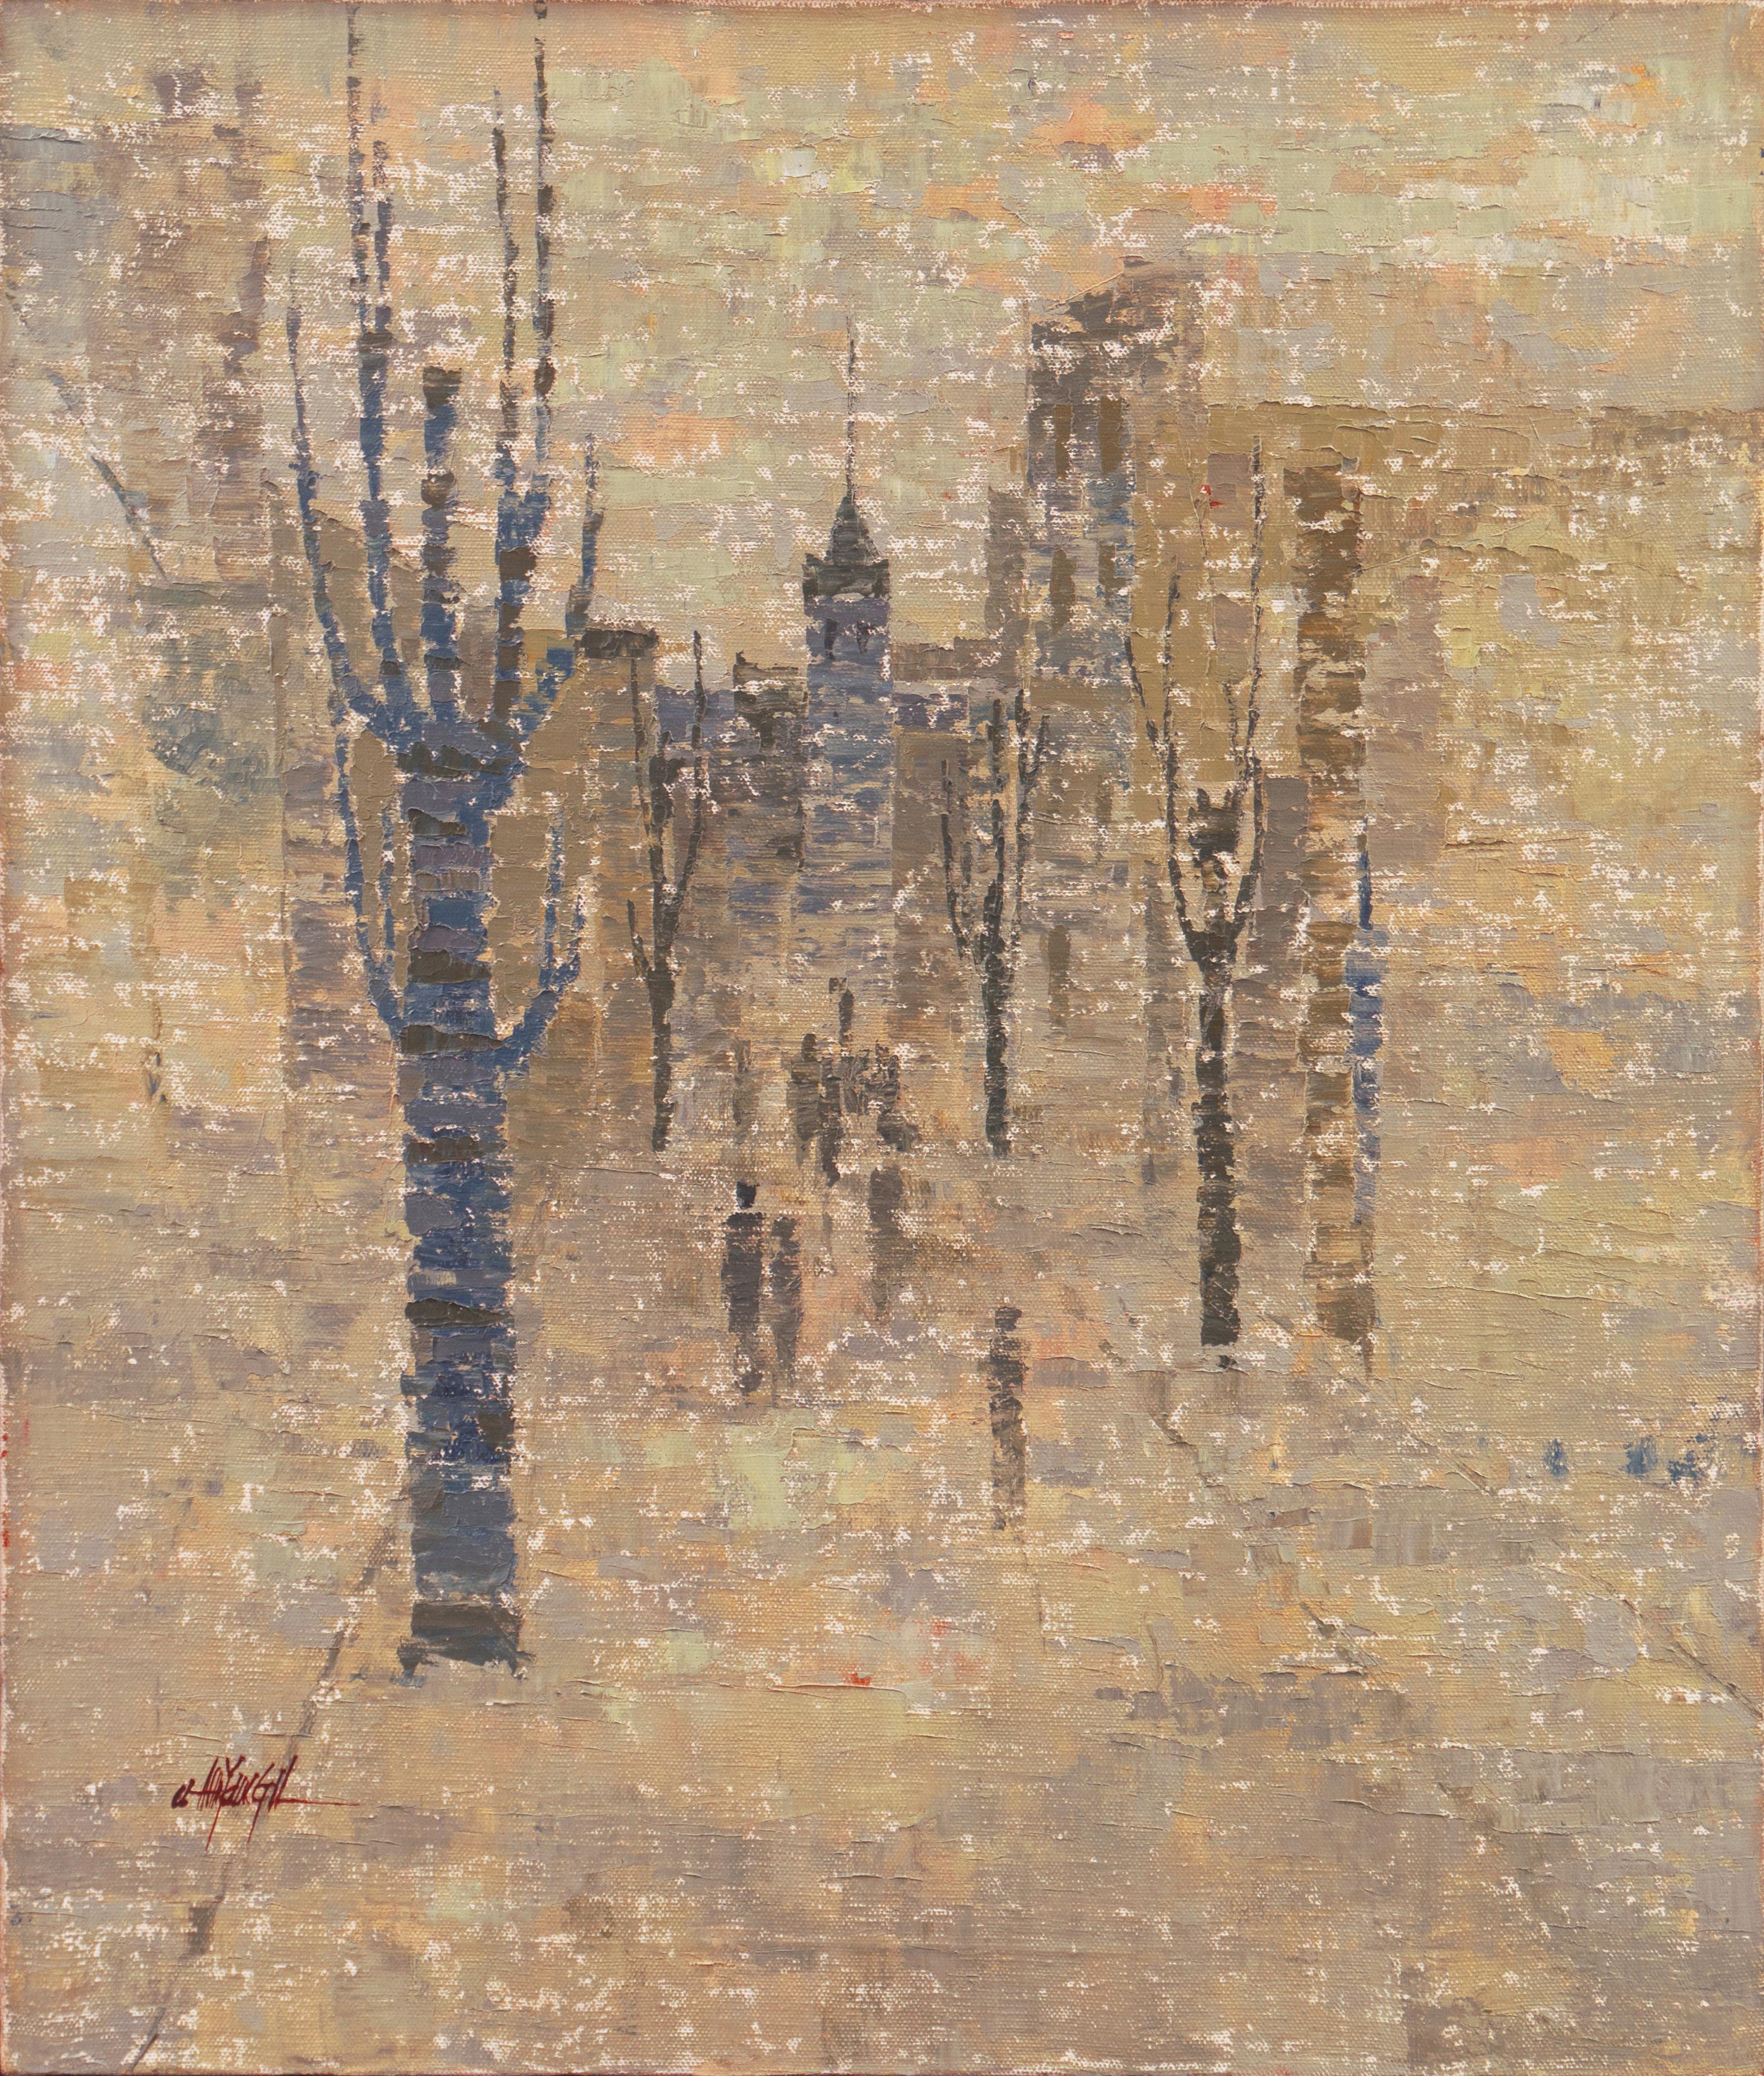 Young-il Ahn Abstract Painting - 'Cityscape with Figures', Korean Tonalist Oil,  Salon Pagodong, Seoul, LACMA